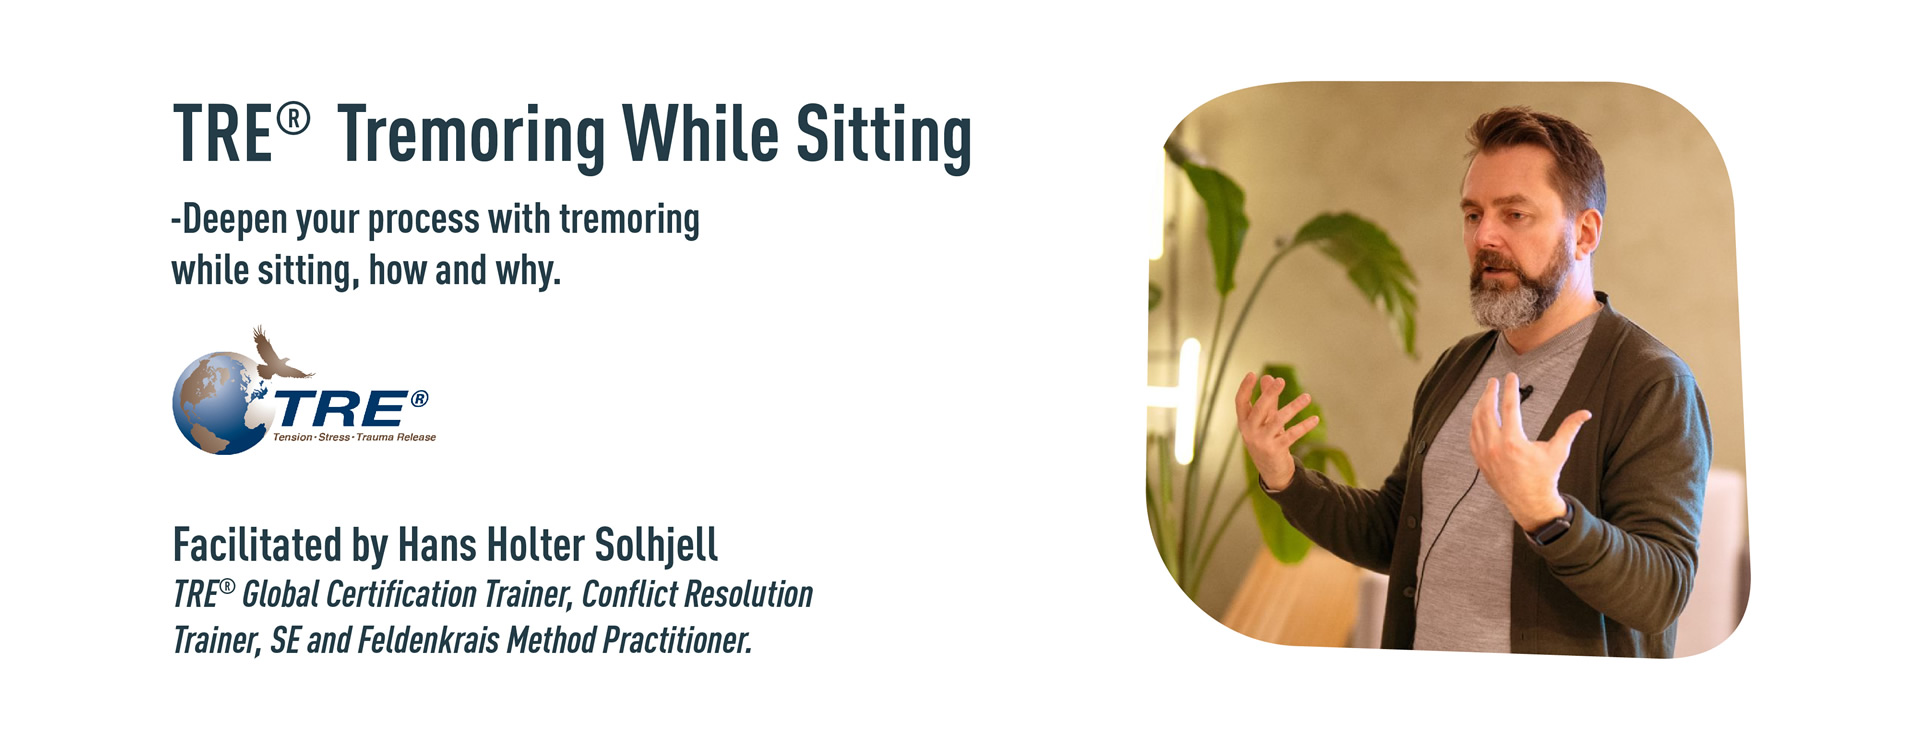 TRE® Tremoring While Sitting with Hans Holter Solhjell